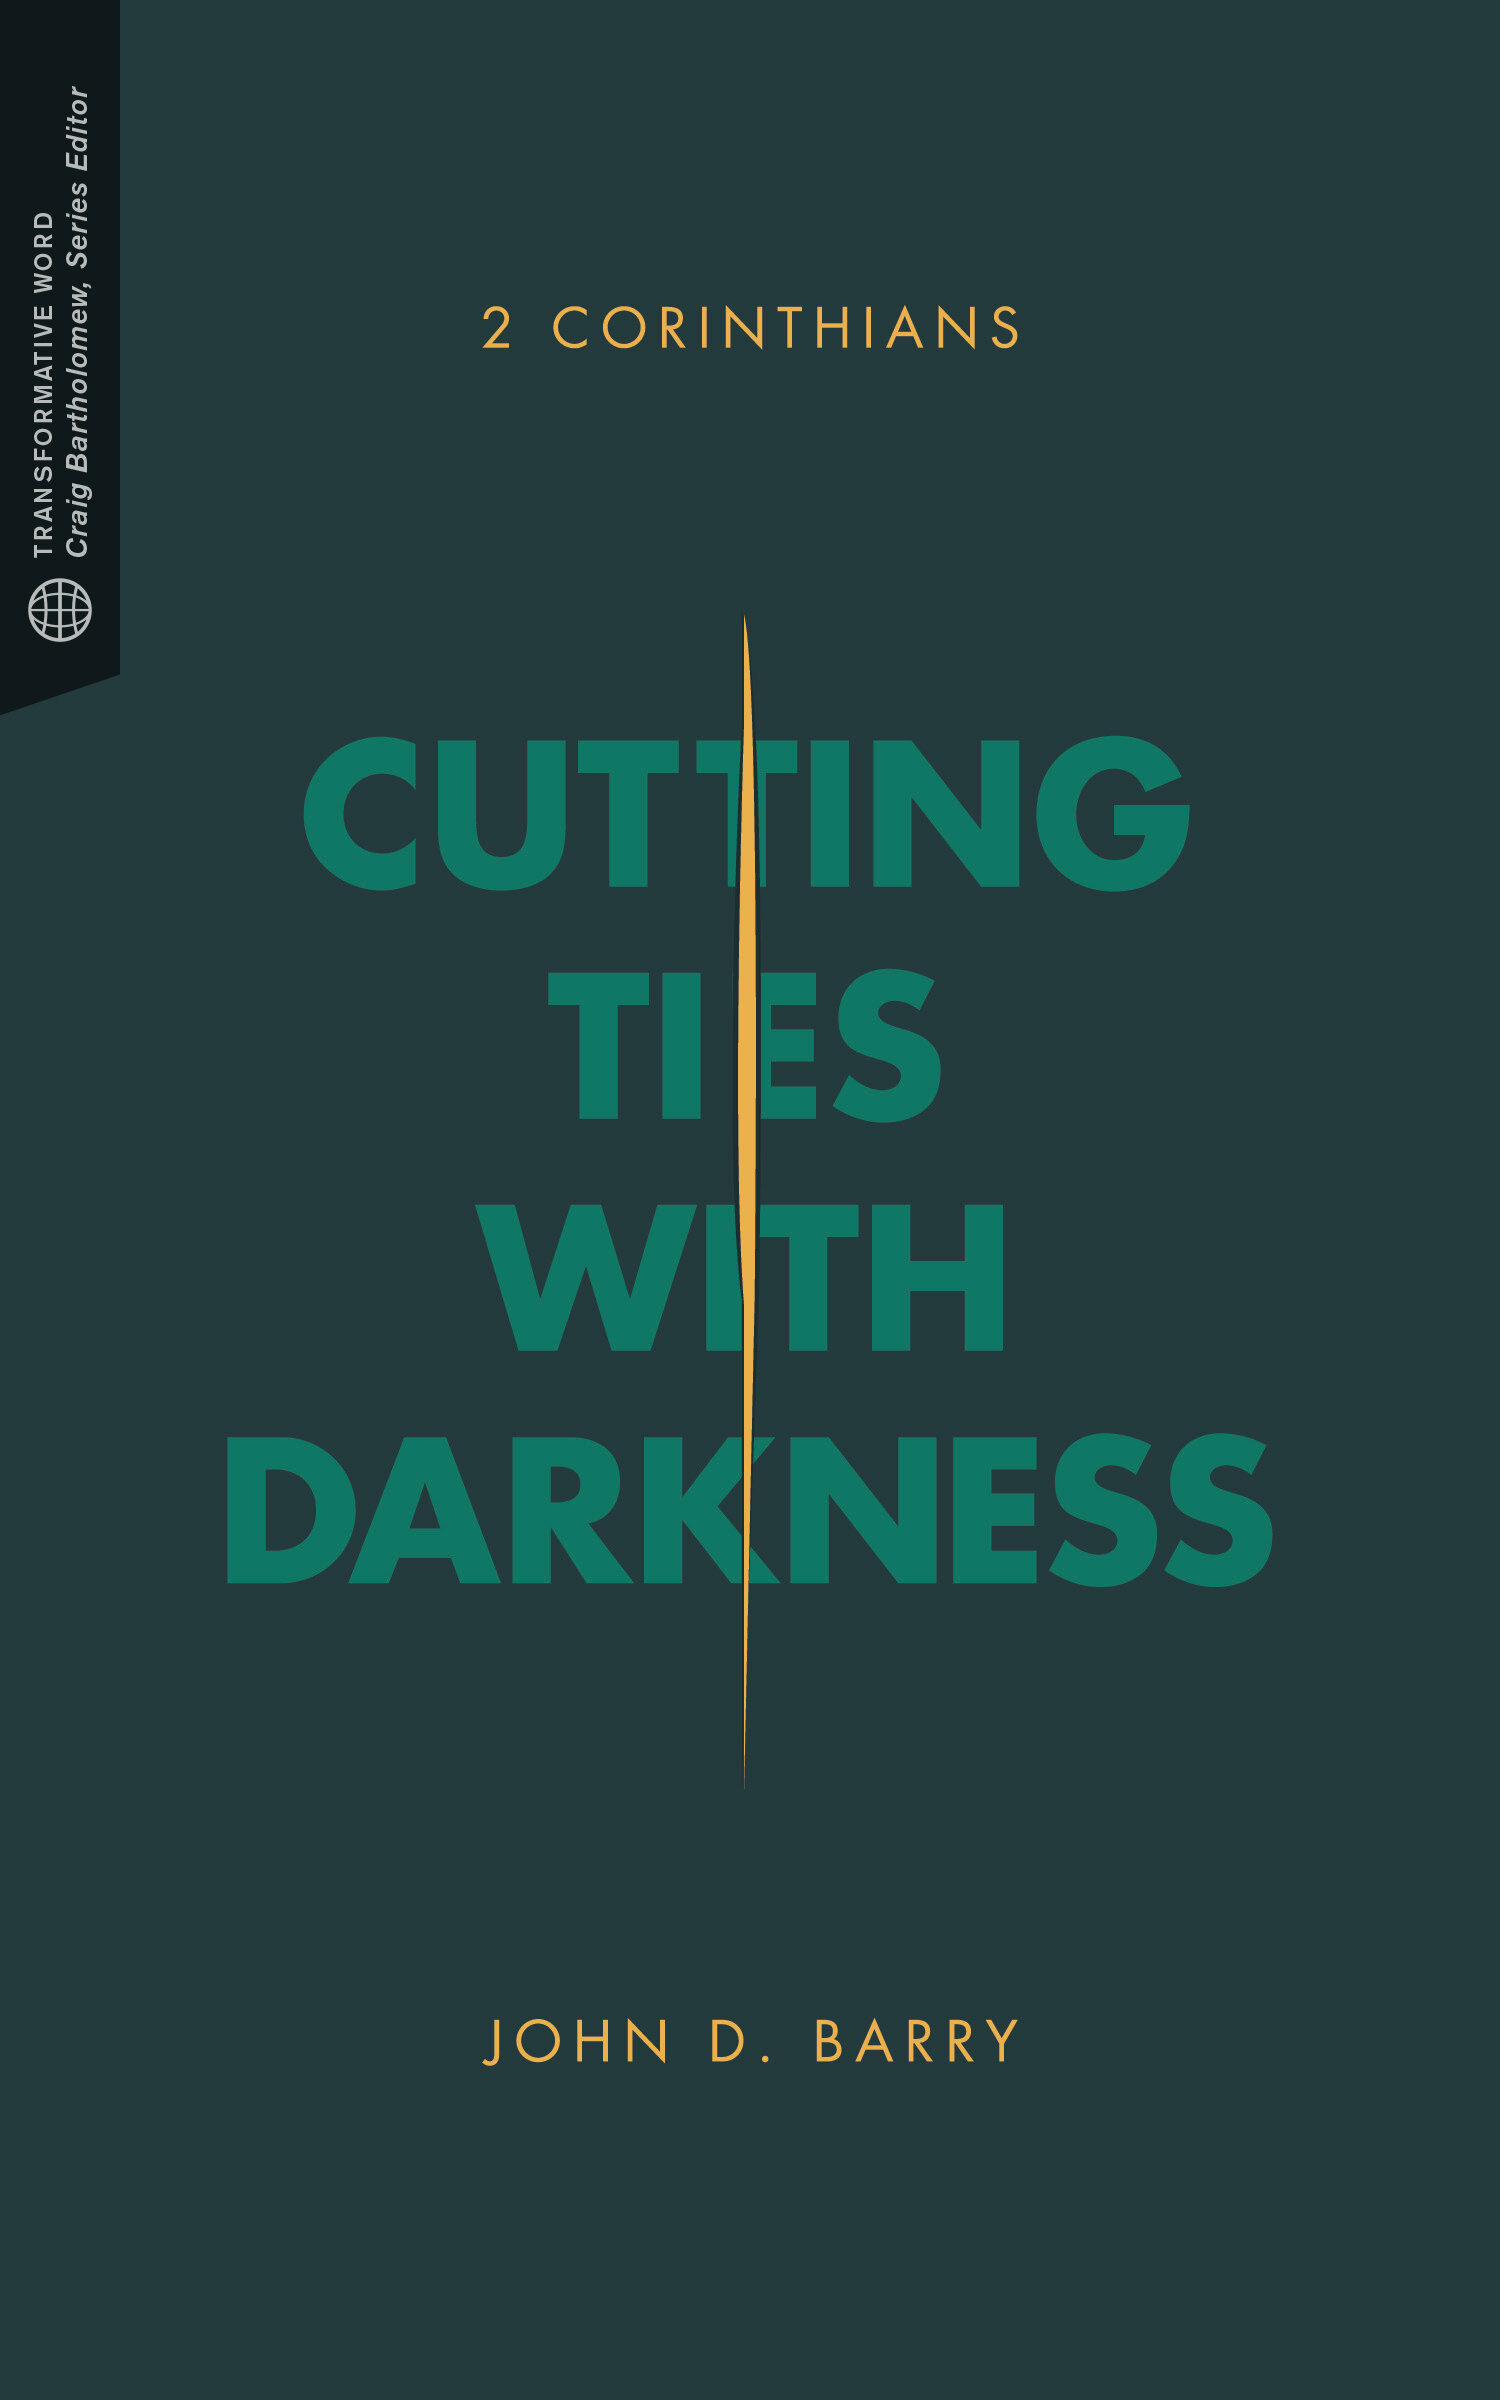 Cutting Ties with Darkness